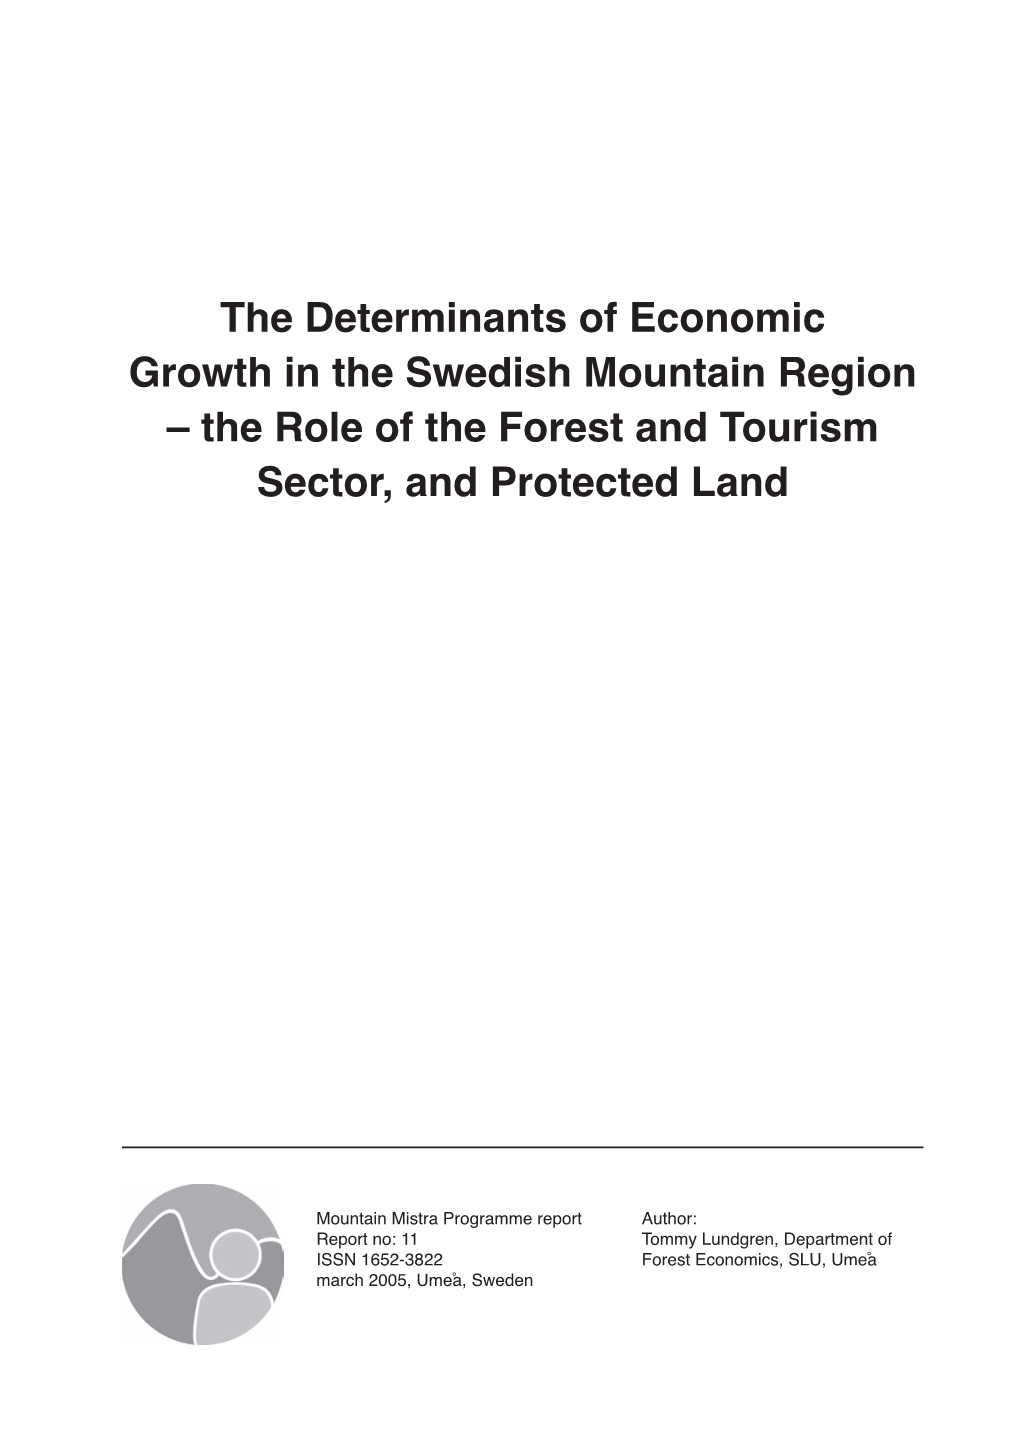 The Determinants of Economic Growth in the Swedish Mountain Region – the Role of the Forest and Tourism Sector, and Protected Land